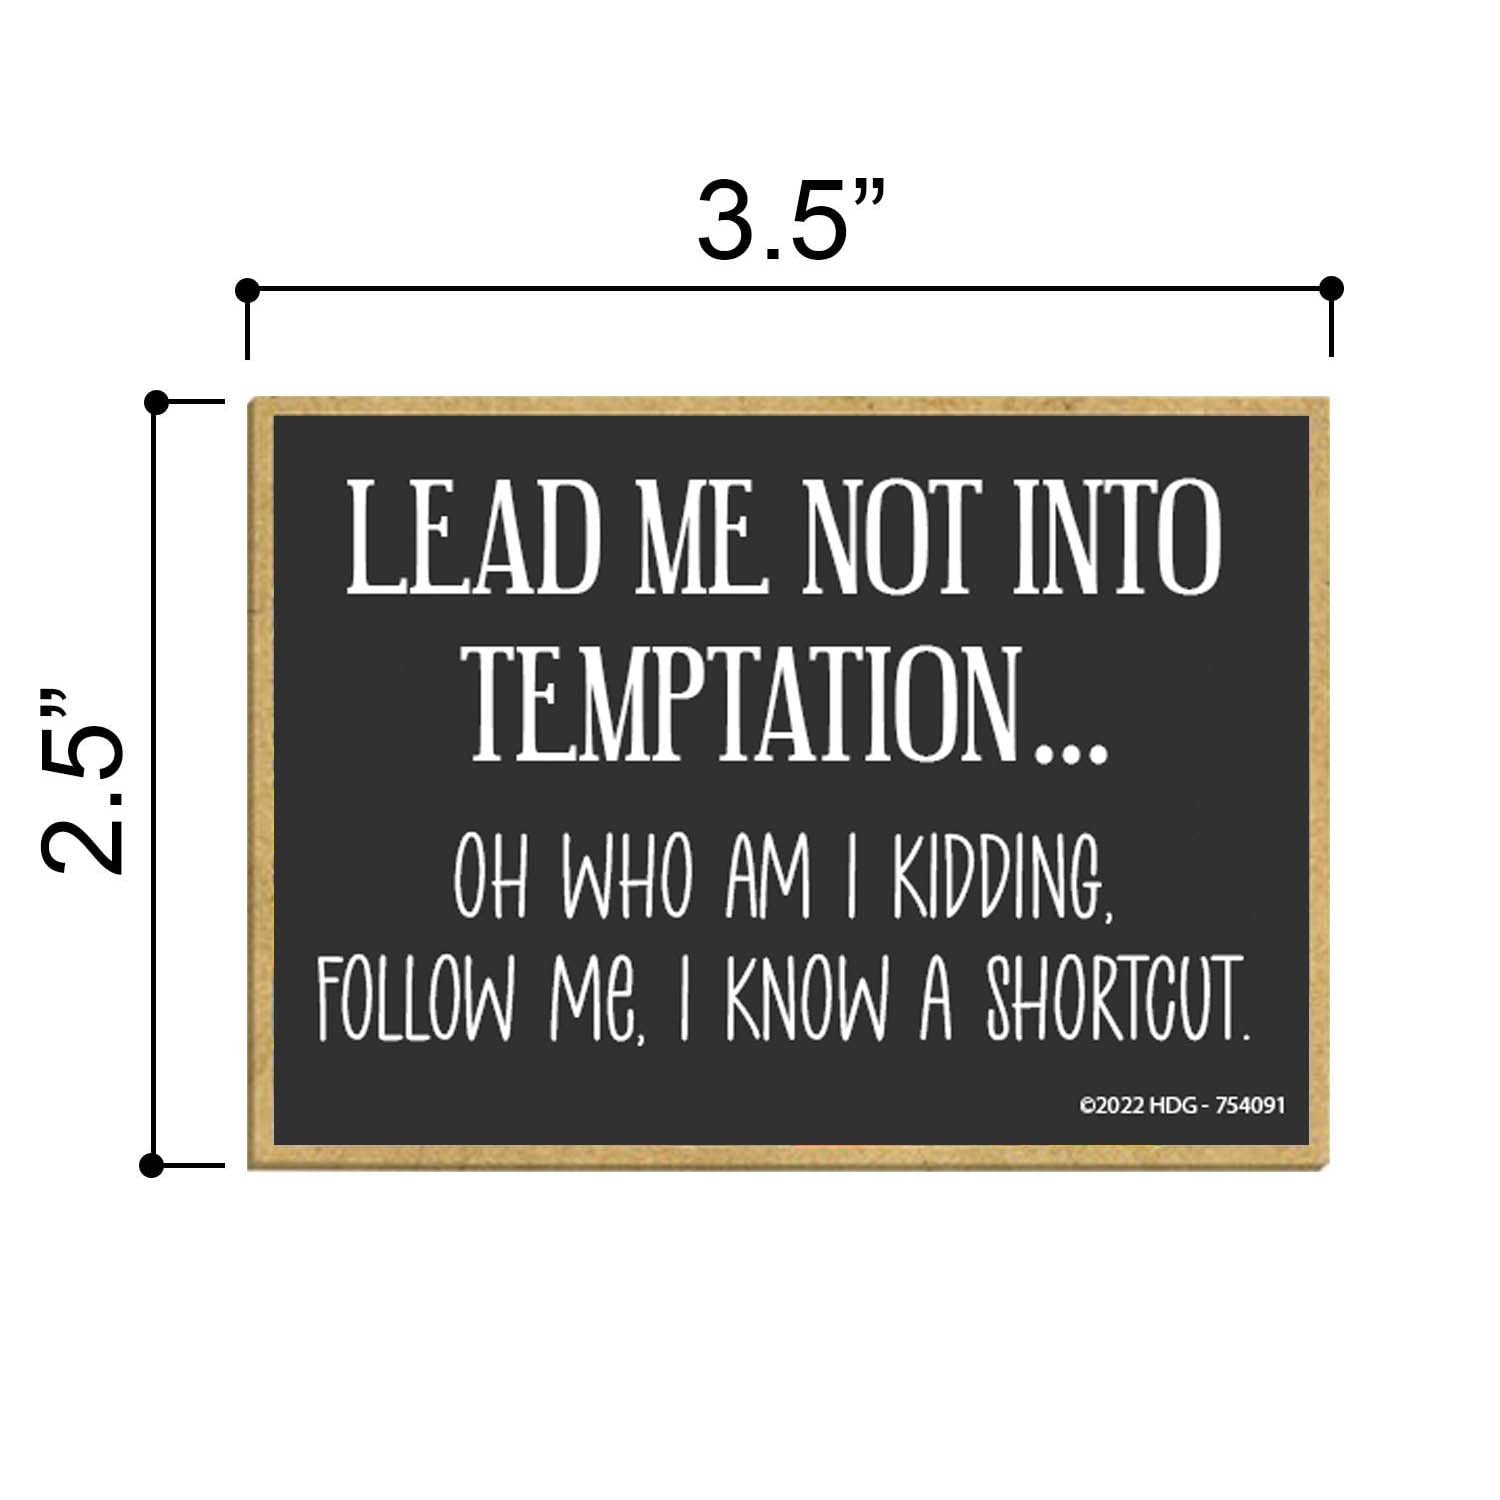 Honey Dew Gifts, Lead Me Not Into Temptation Oh Who Am I Kidding Follow Me I Know a Shortcut, 3.5 inch by 2.5 inch, Made in USA, Locker Decorations, Fridge Magnets, Decorative Magnets, Funny Magnets